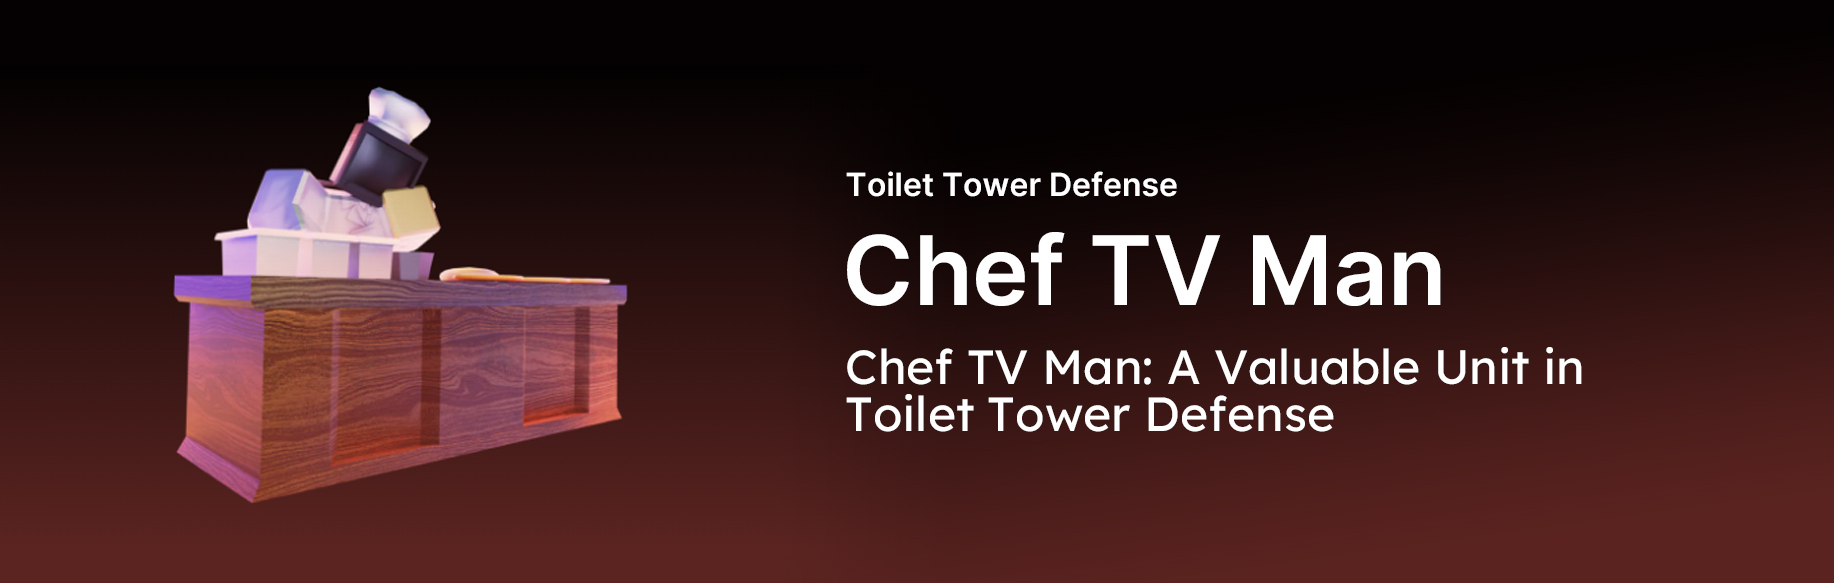  Chef TV Man: A Valuable Unit in Toilet Tower Defense